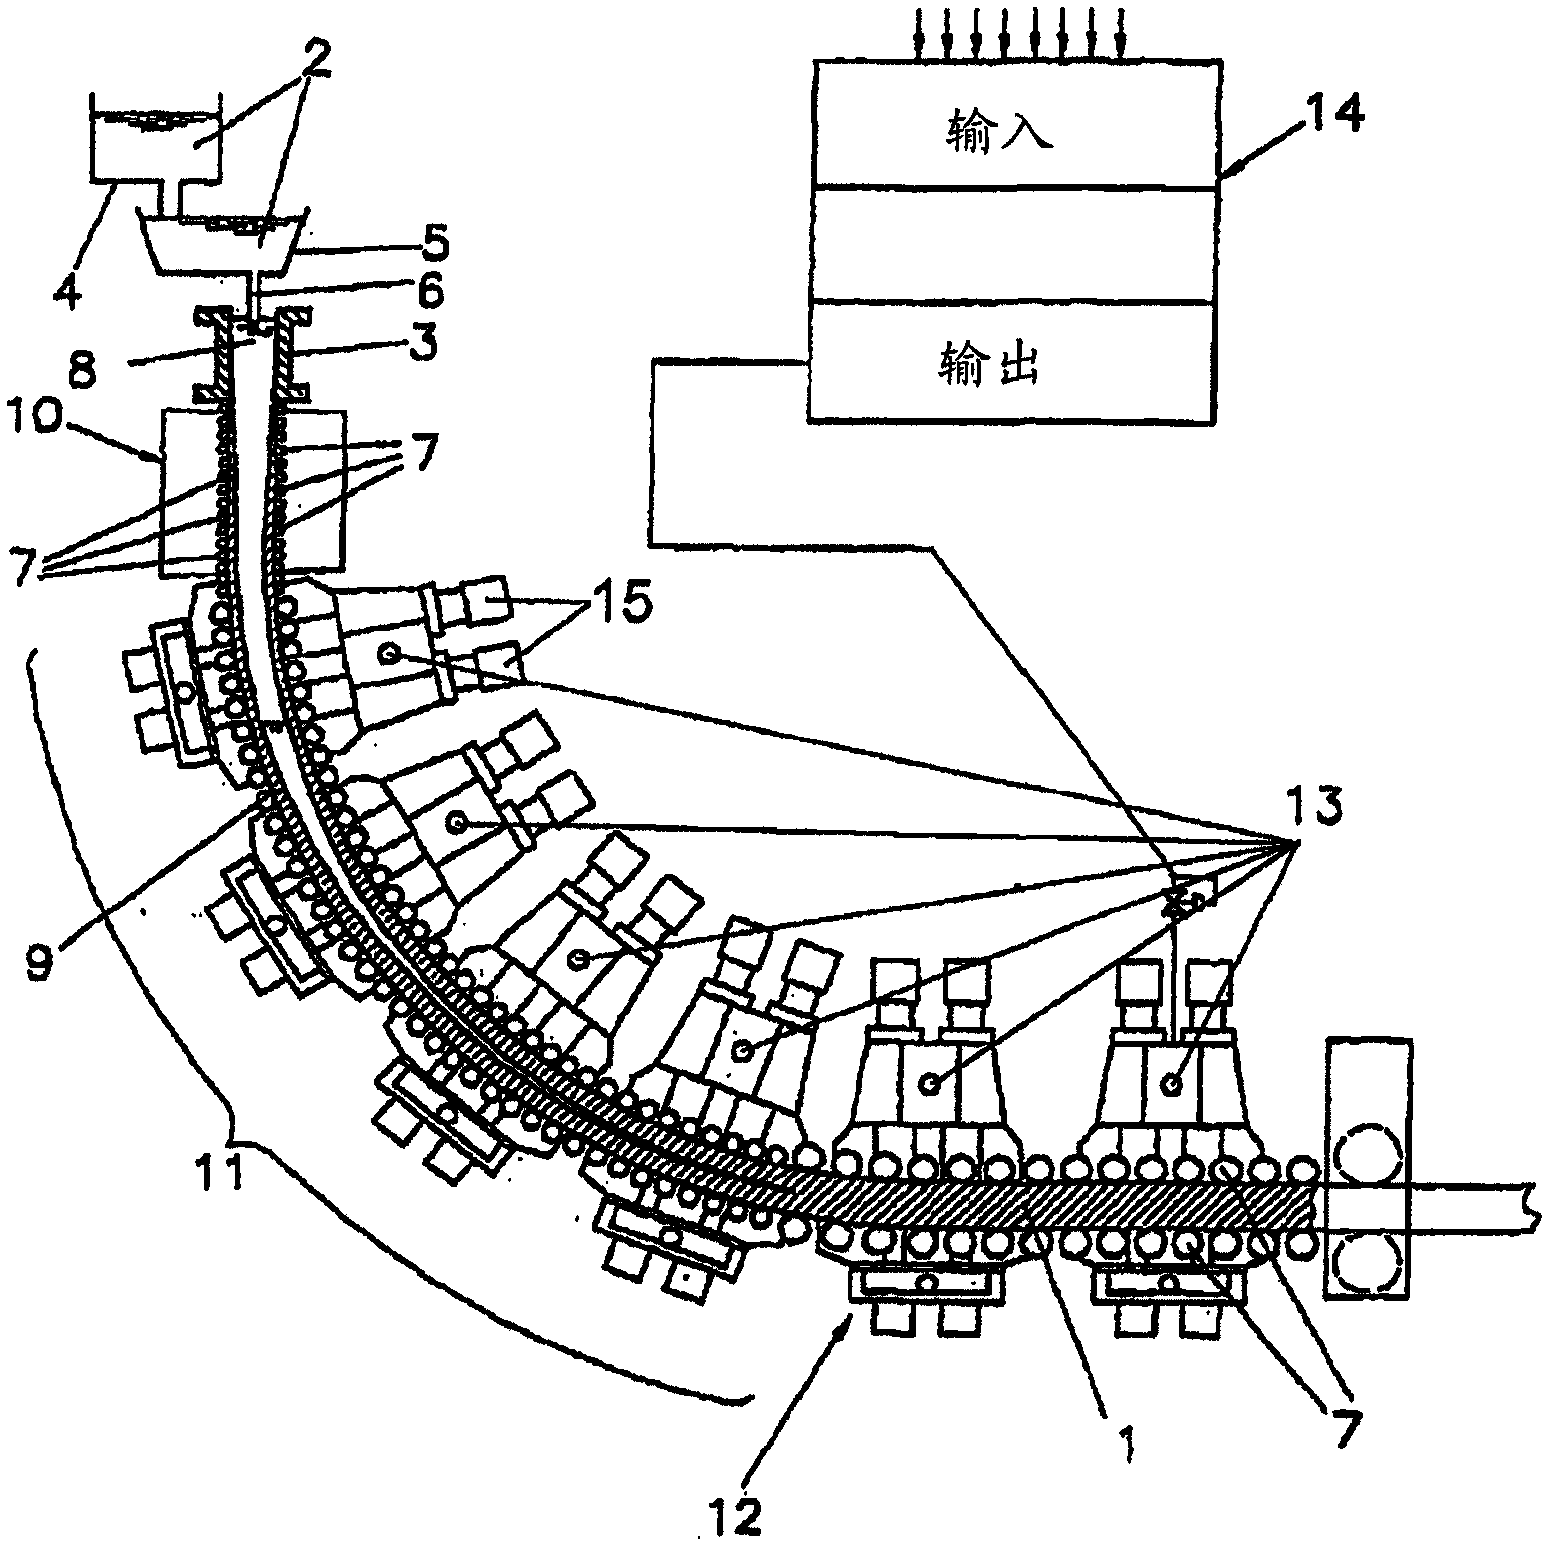 Method for the continuous casting of a metal strand